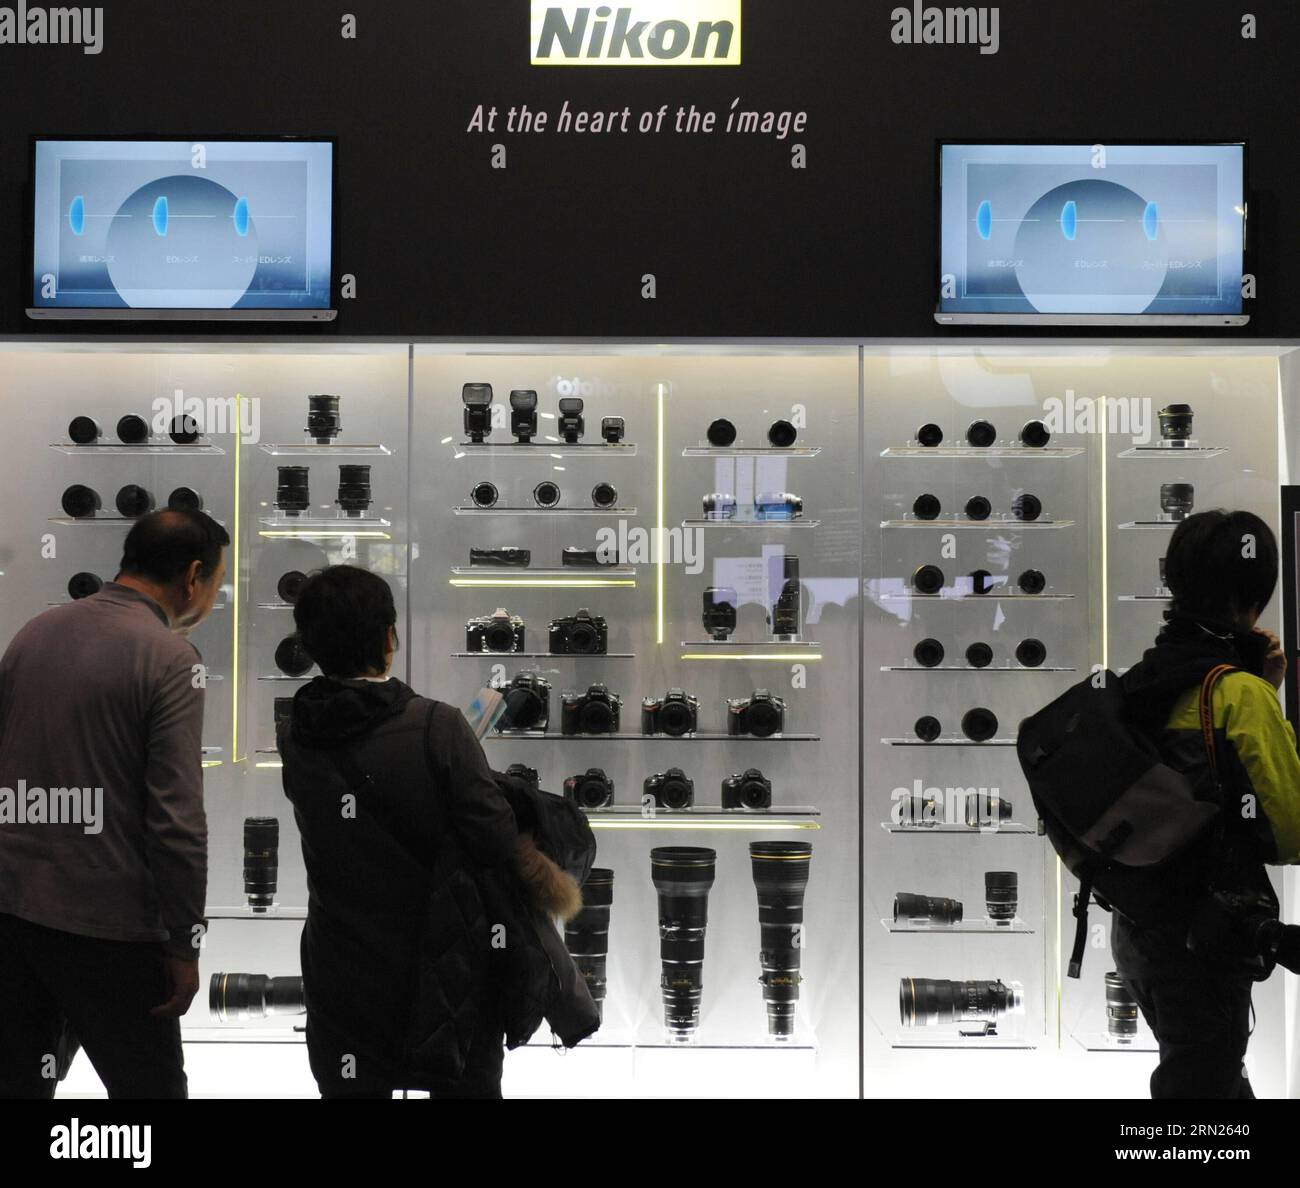 (150212) -- TOKYO, Feb. 12, 2014 -- Visitors look at Nikon products at the CP+ Camera and Photo Imaging Show in Yokohama, Japan, Feb. 12, 2015. The four-day exhibition was opened on Feb. 12. ) JAPAN-YOKOHAMA-TECHNOLOGY-SHOW Stringer PUBLICATIONxNOTxINxCHN   Tokyo Feb 12 2014 Visitors Look AT Nikon Products AT The  Camera and Photo Imaging Show in Yokohama Japan Feb 12 2015 The Four Day Exhibition what opened ON Feb 12 Japan Yokohama Technology Show Stringer PUBLICATIONxNOTxINxCHN Stock Photo